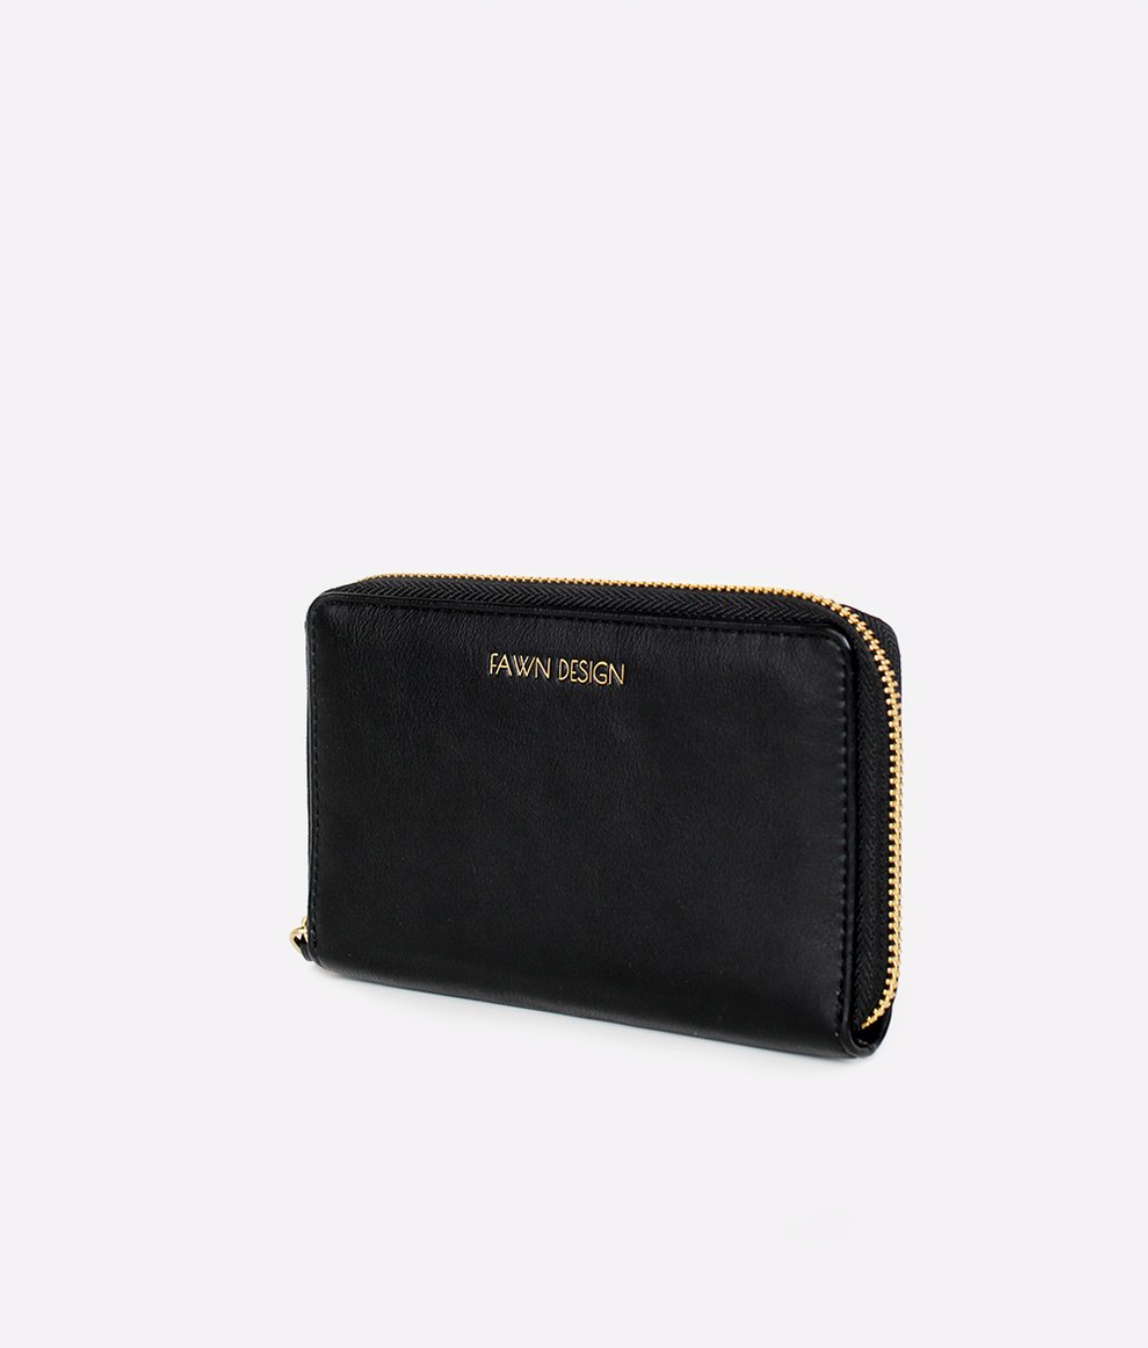 Women's Bimba Y Lola Wallets and cardholders from $47